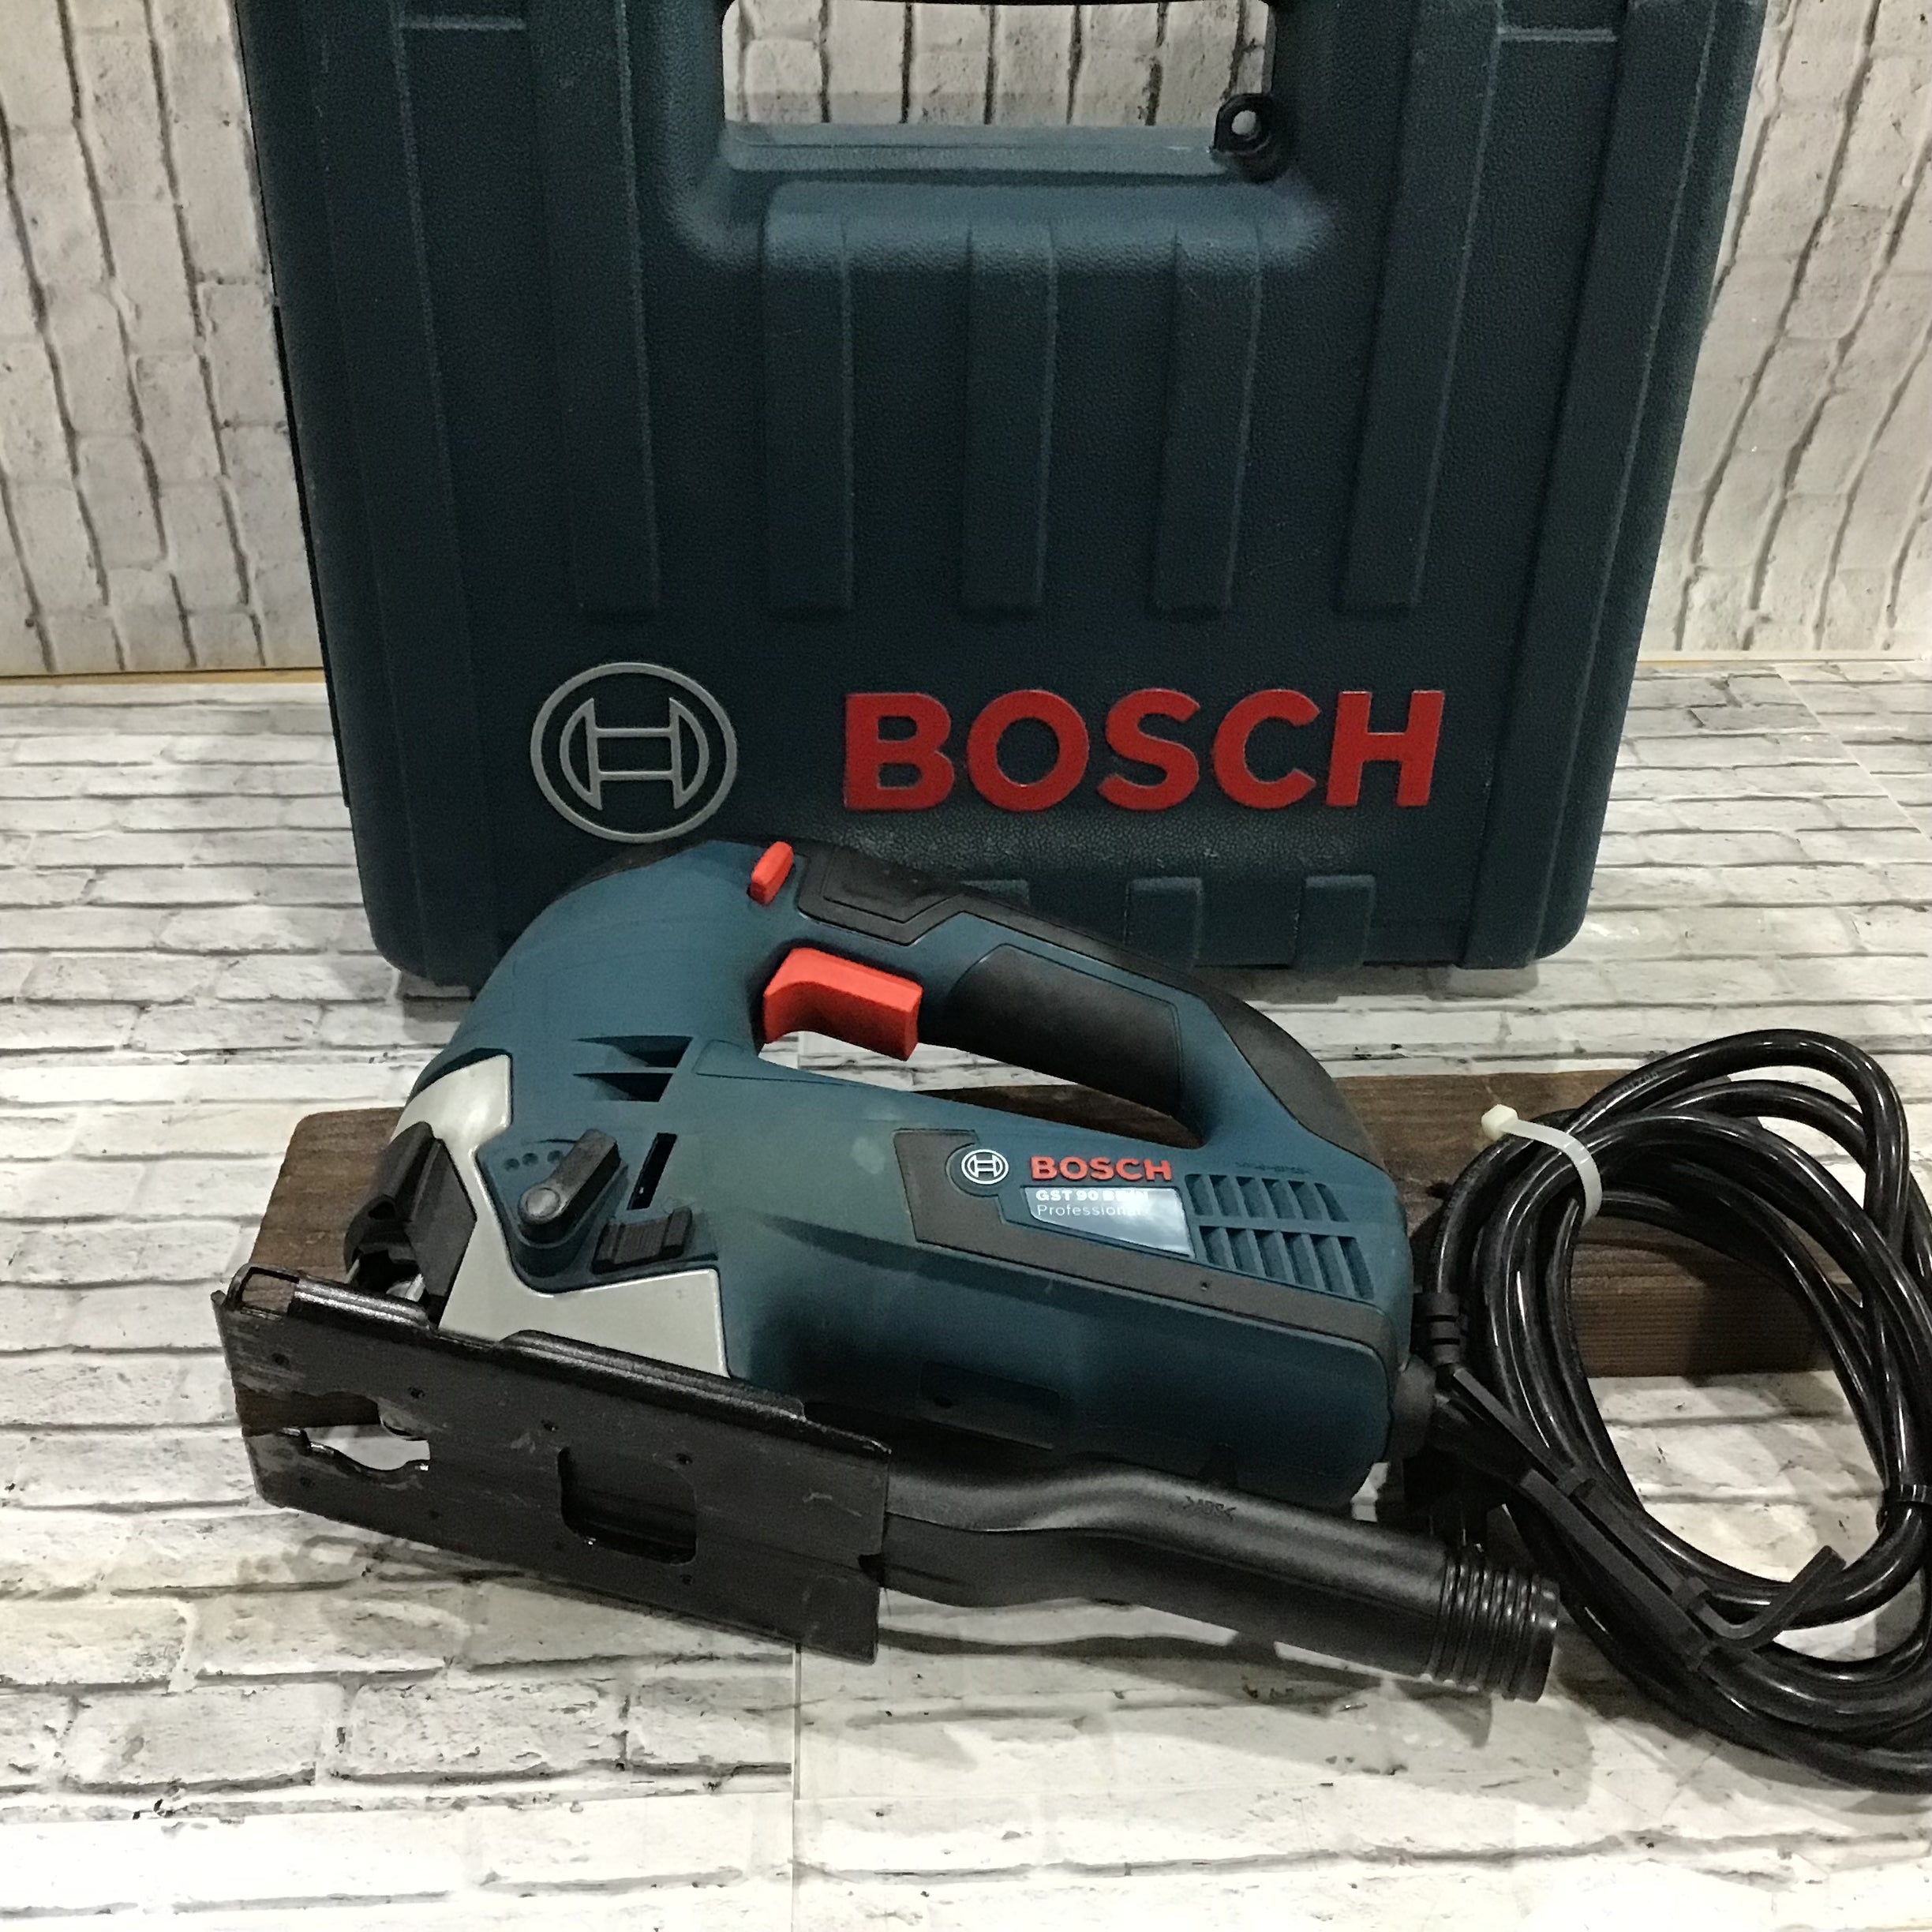 〇BOSCH(ボッシュ) ジグソー GST90BE/N【川口店】 – アクトツール